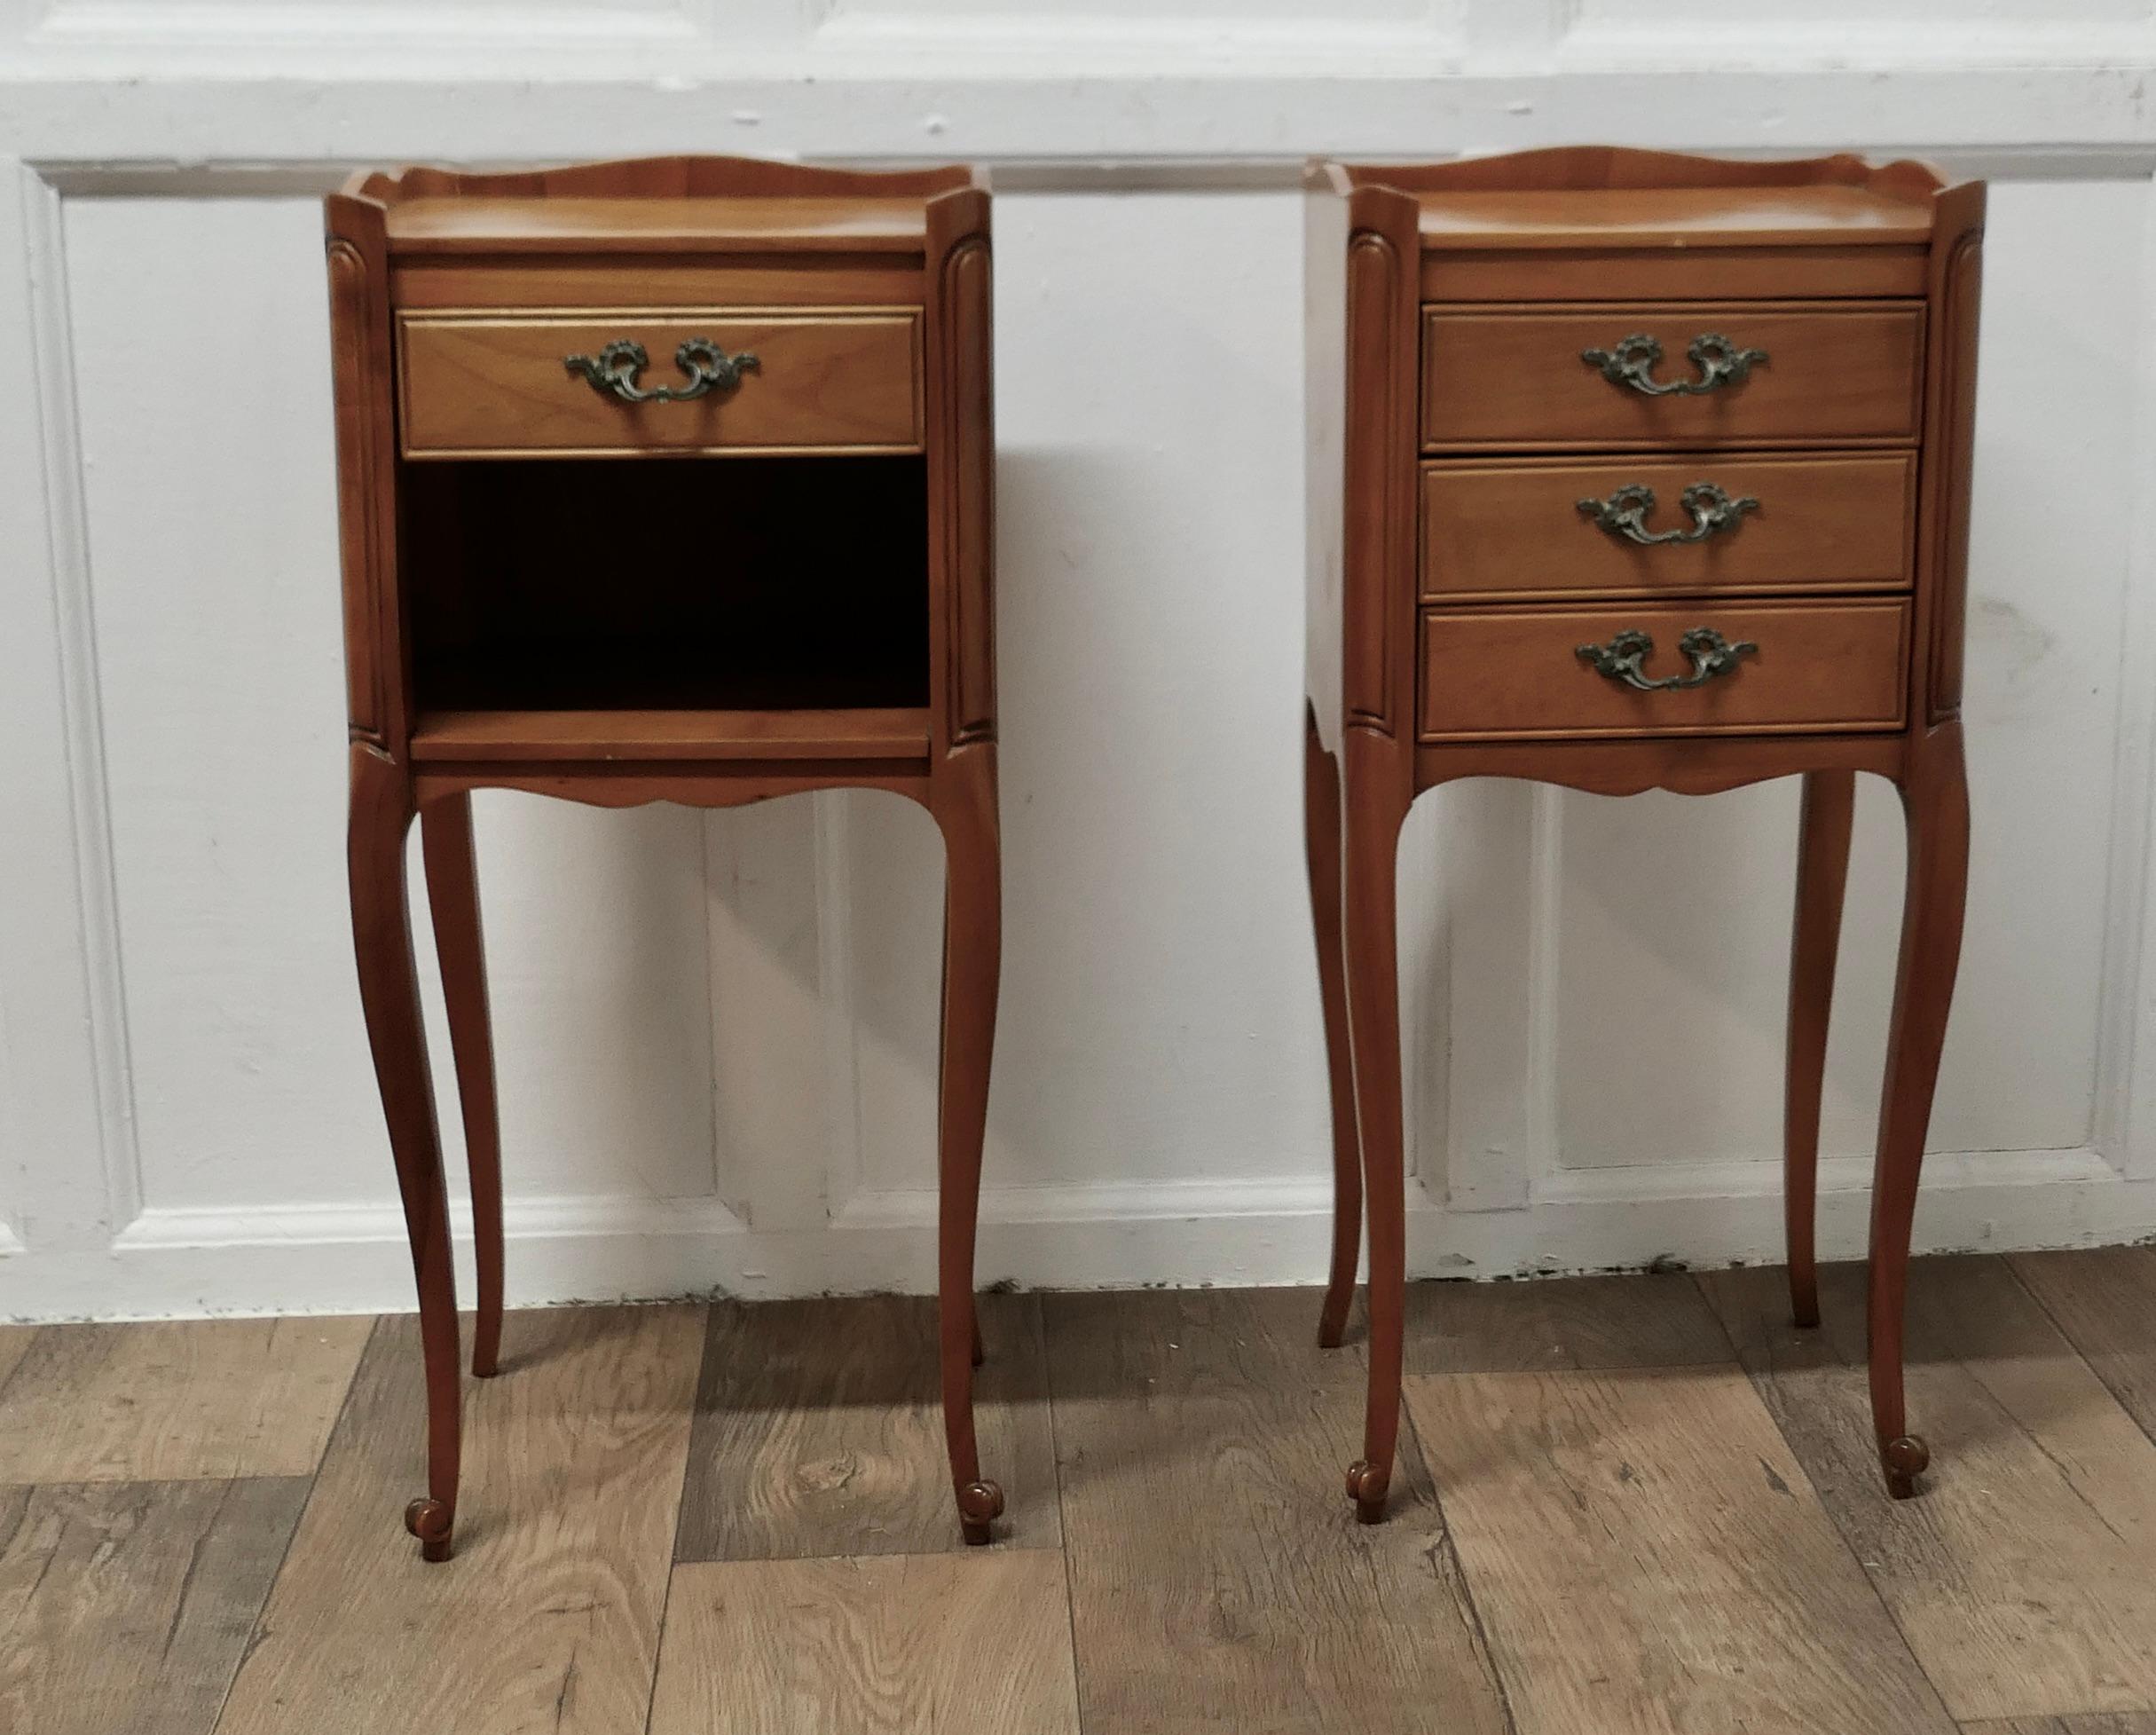 Pair of Petite French Cherry Wood Bedside Cabinets or Tables

This is a pretty pair of cabinets or chevets, they stand on shaped cabriole legs and a small gallery around the top, one has 3 drawer to the front  and the other has one drawers and an